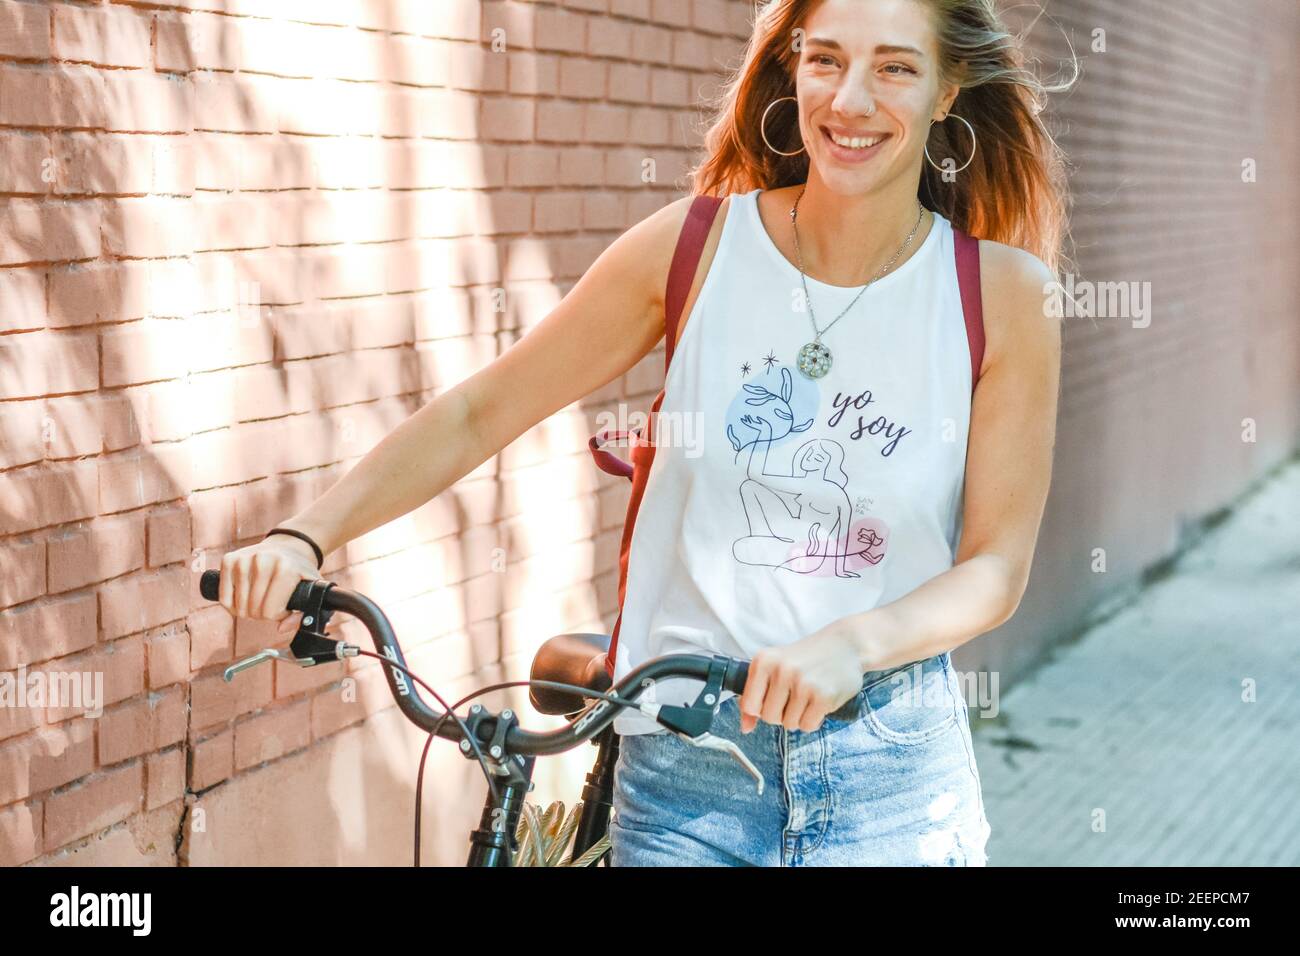 Woman with bicyle walking on street Stock Photo